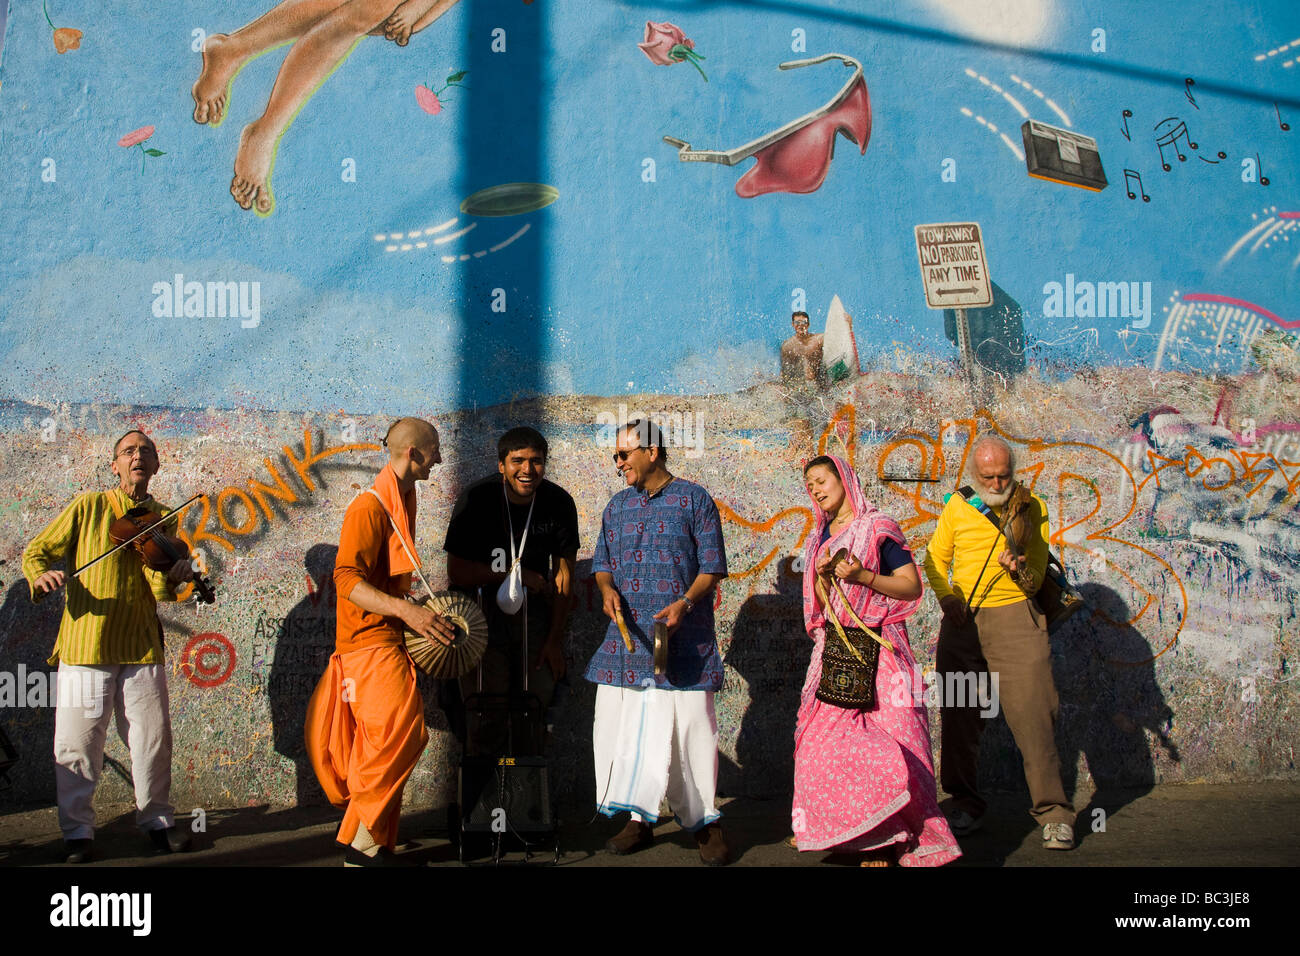 Hare Krishna Devotees playing music and chanting at Venice Beach Los Angeles County California United States of America Mural by R Cronk Stock Photo